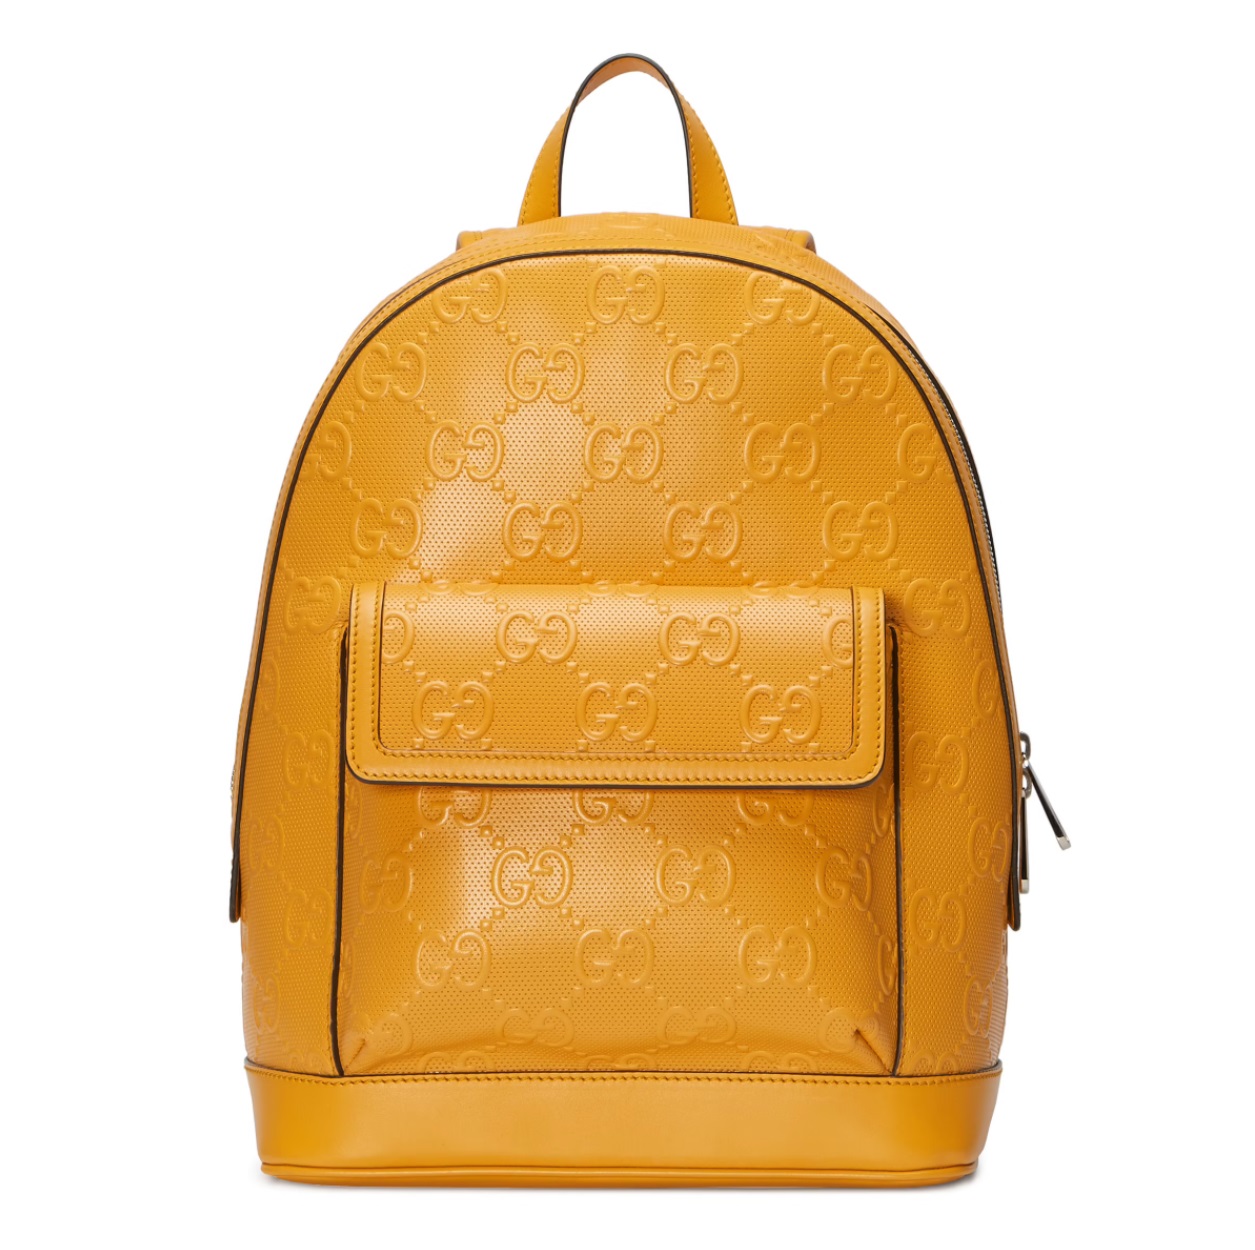 The Coolest Backpacks To Buy This Season